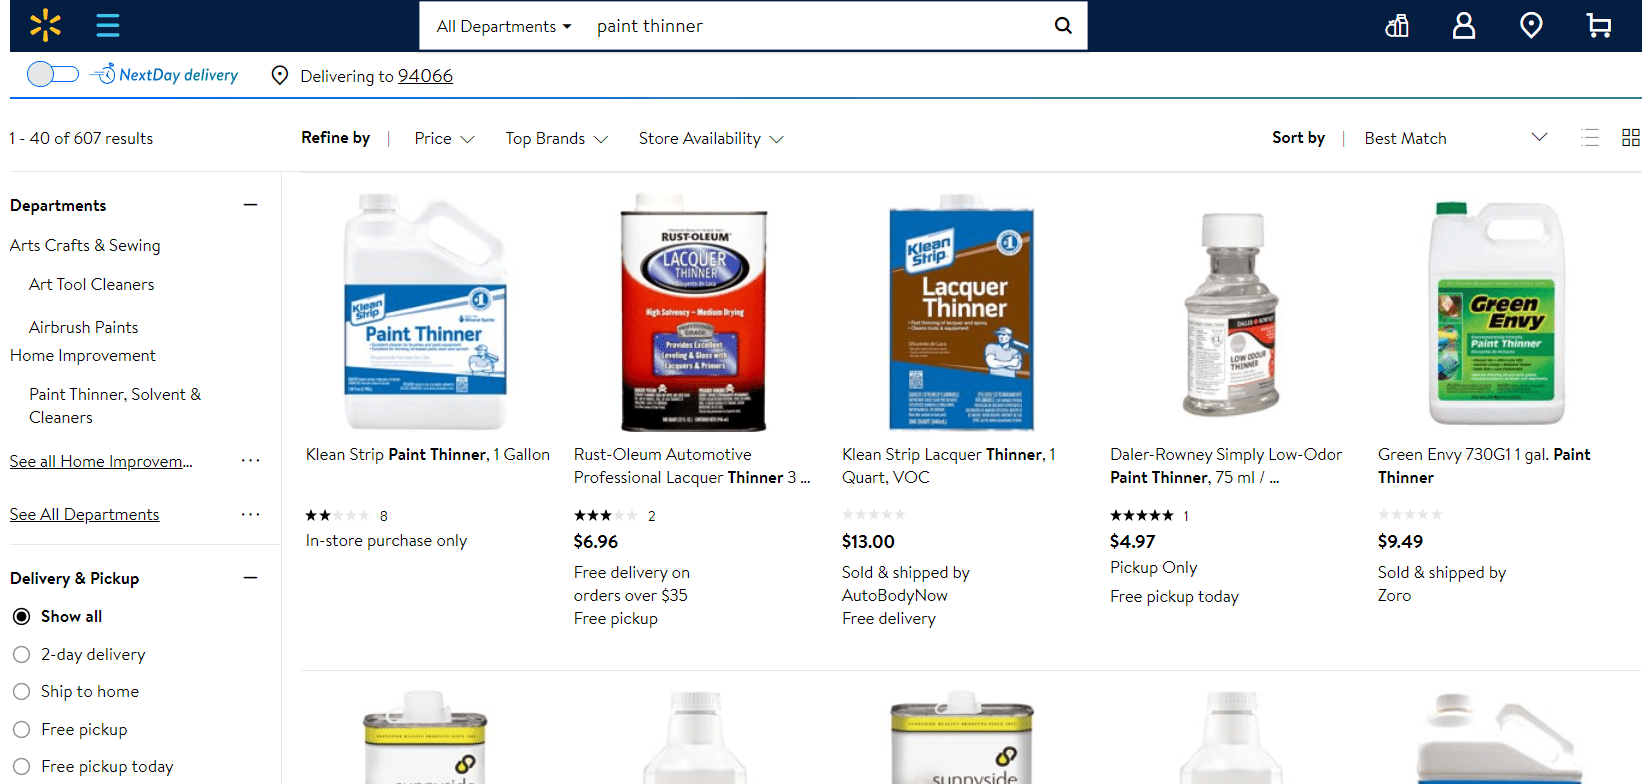 Paint thinner search results